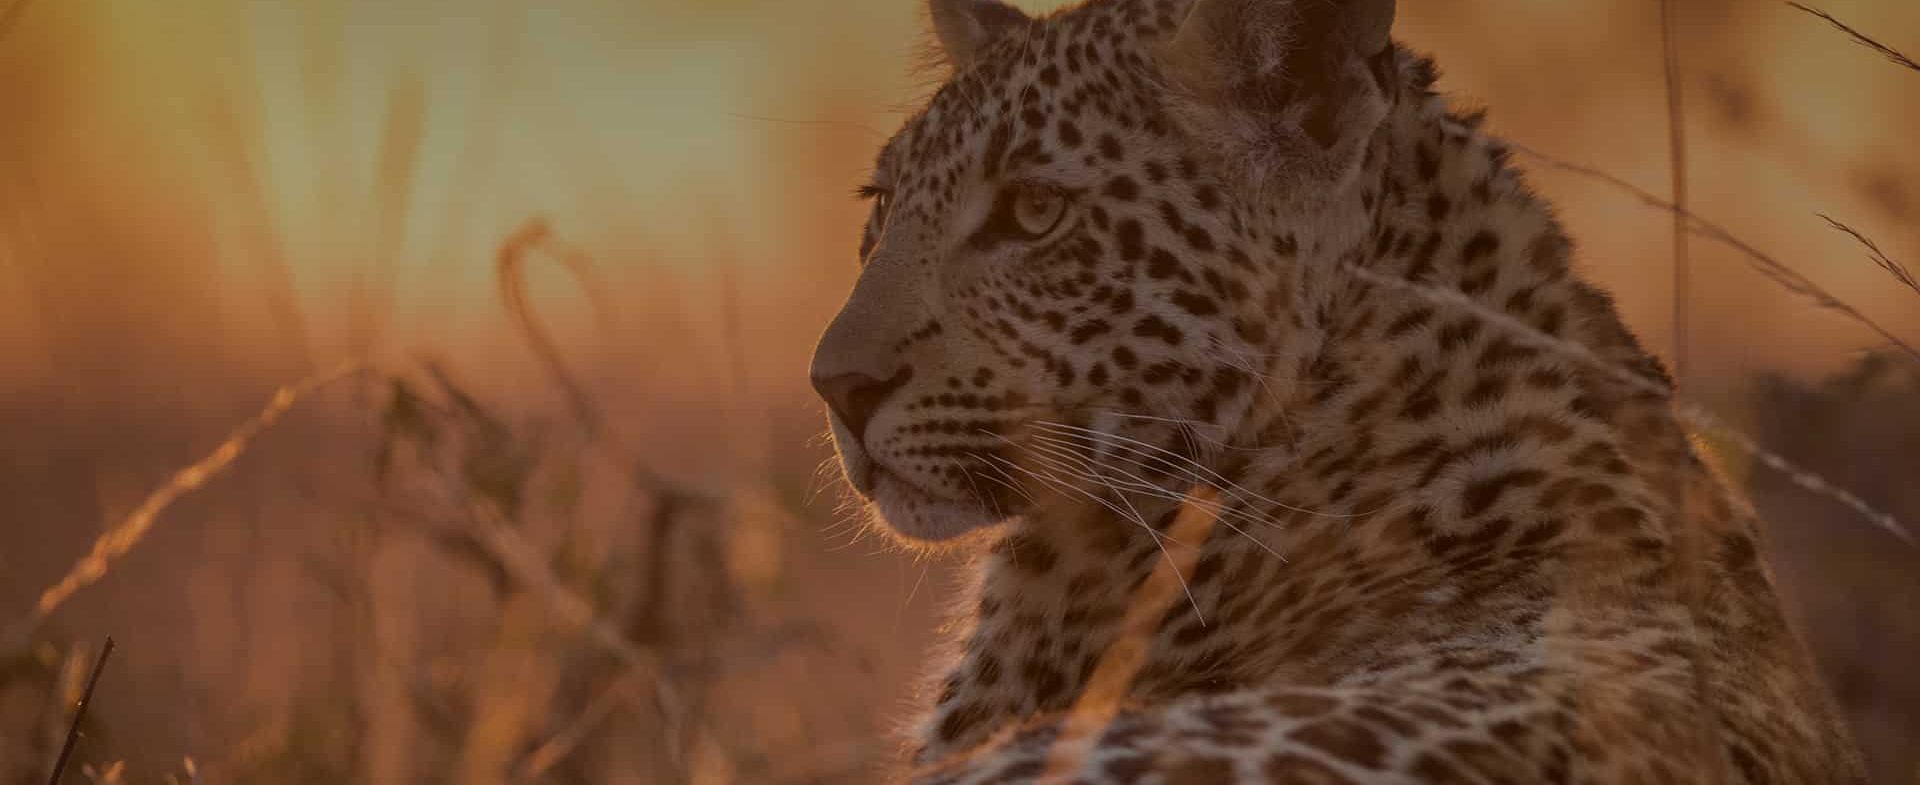 A close-up image of a leopard at sunset, focused on its profile with a glowing orange backdrop. The leopard's fur and whiskers are detailed, highlighted by the soft sunlight of the Sabi Sand